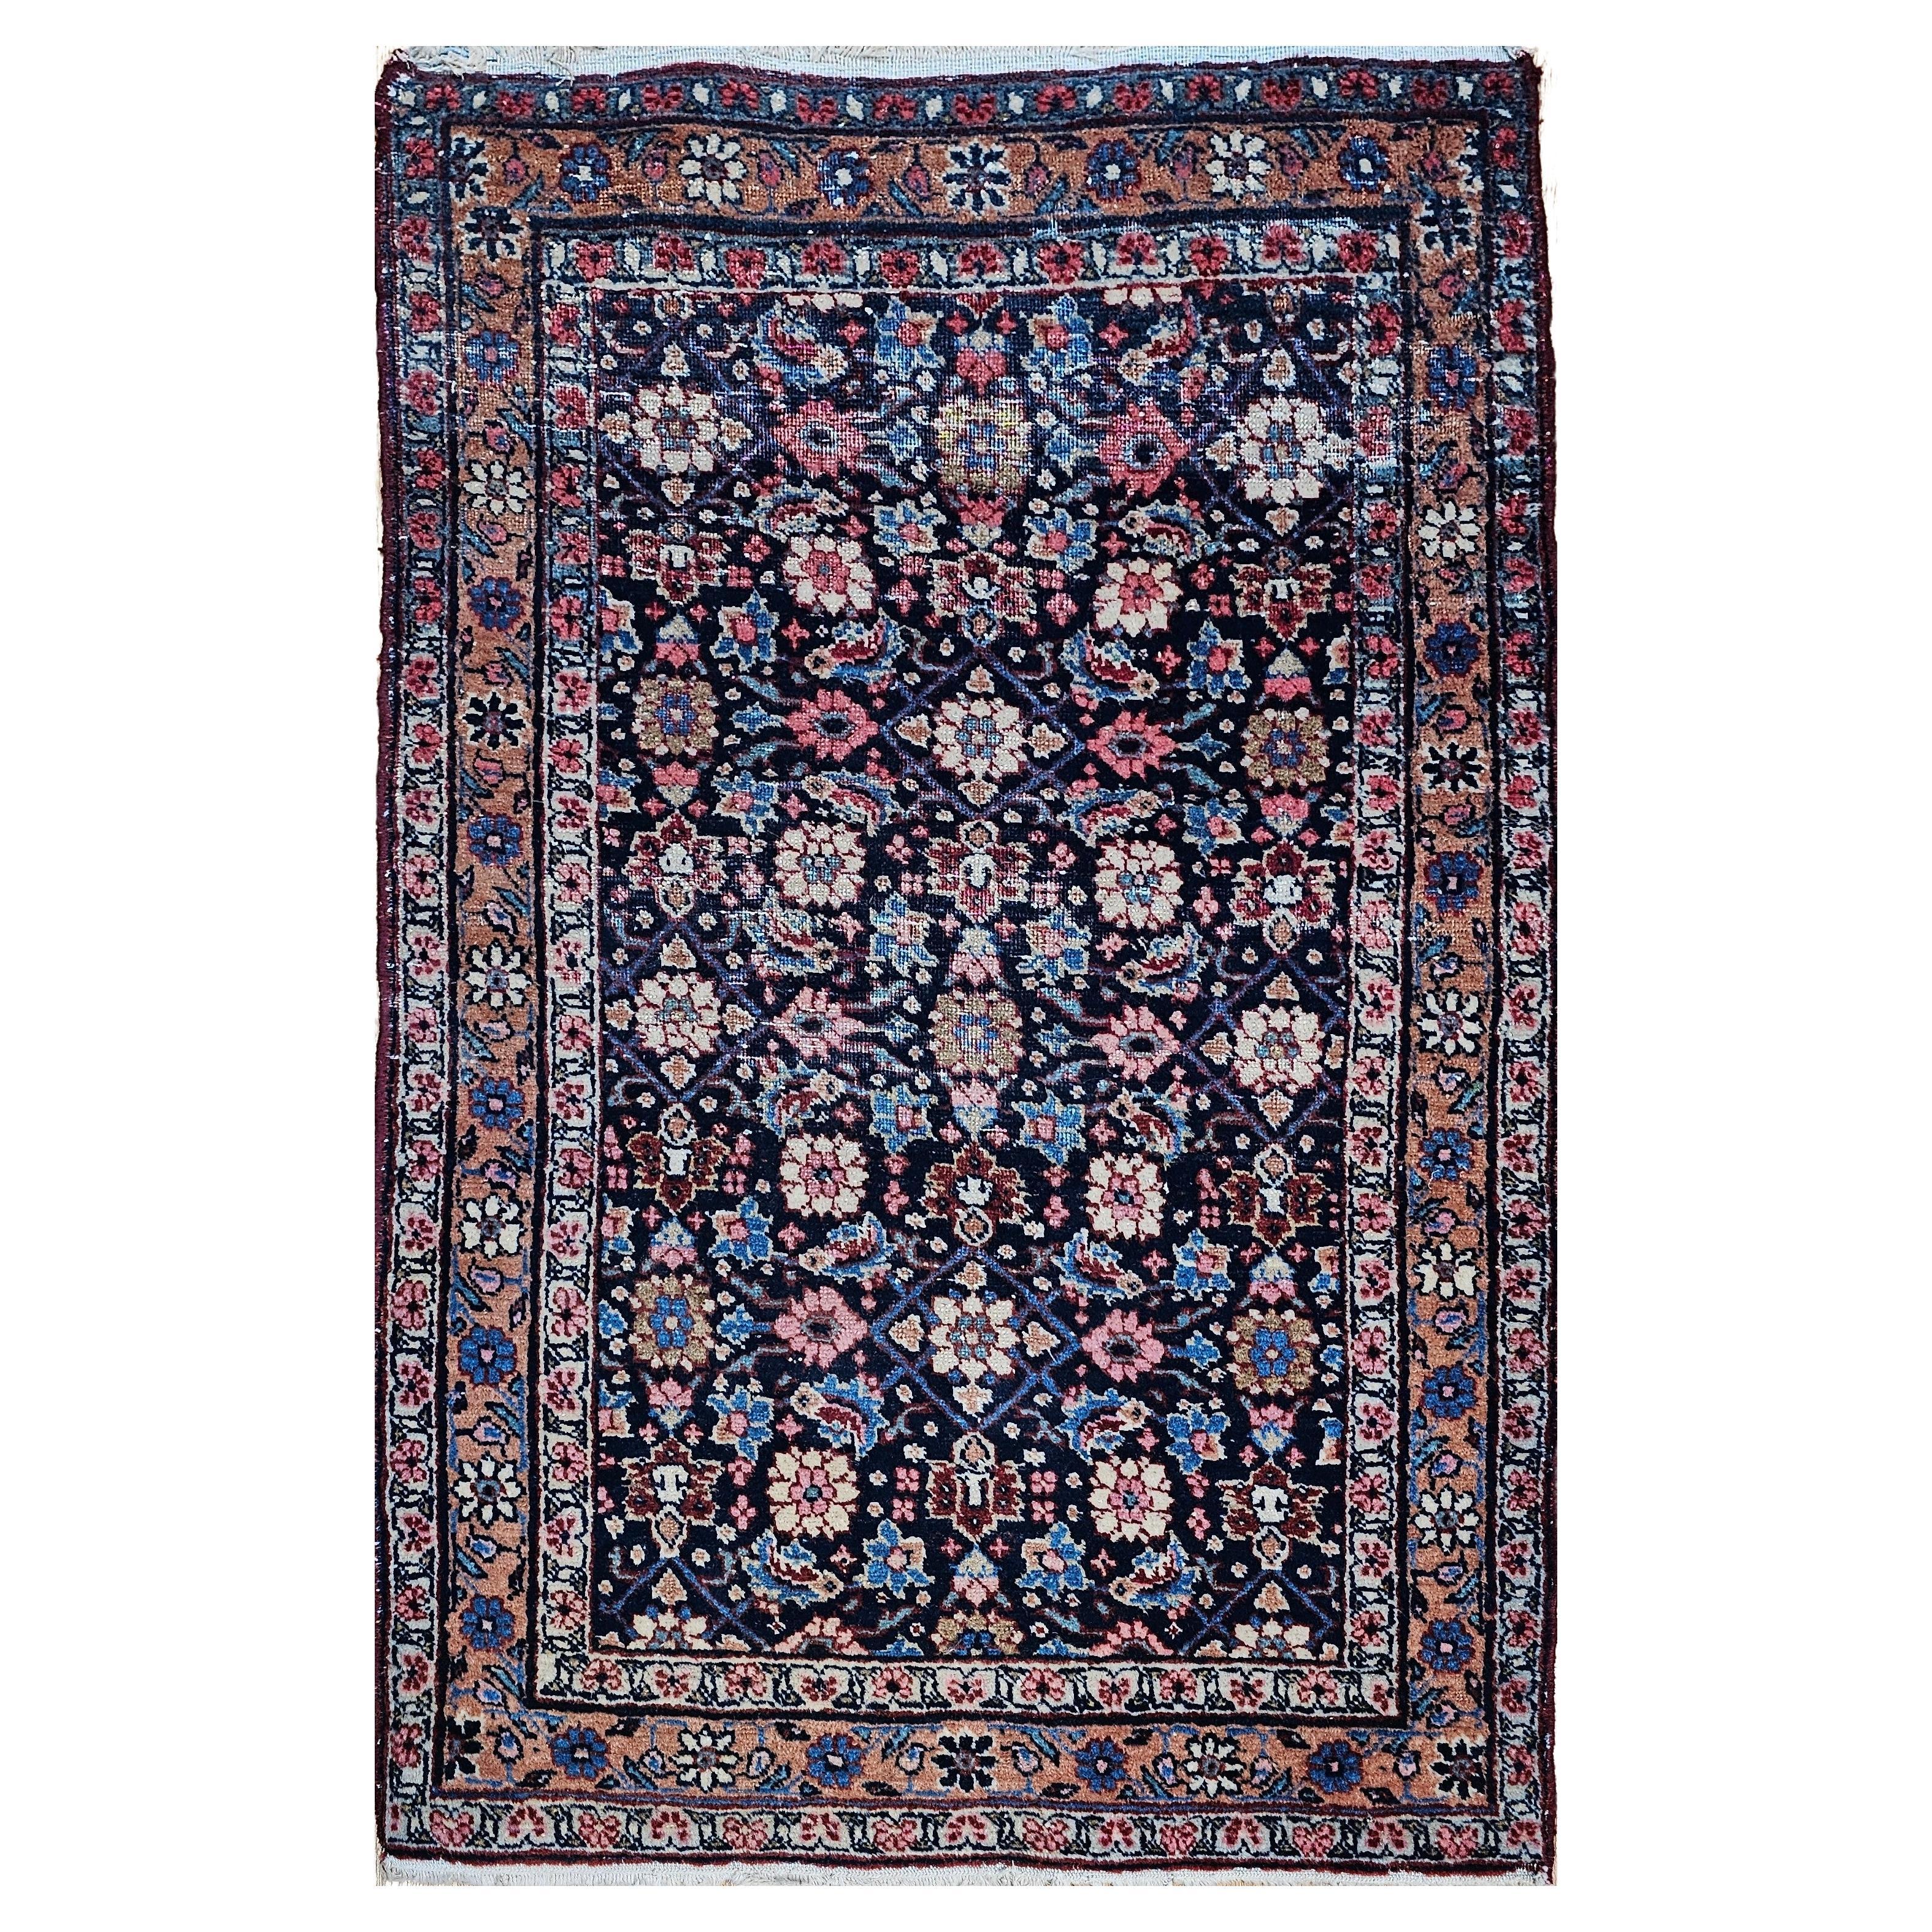 Vintage Persian Malayer Area Rug in an Allover Pattern in Navy, Red, Pink, Blue For Sale